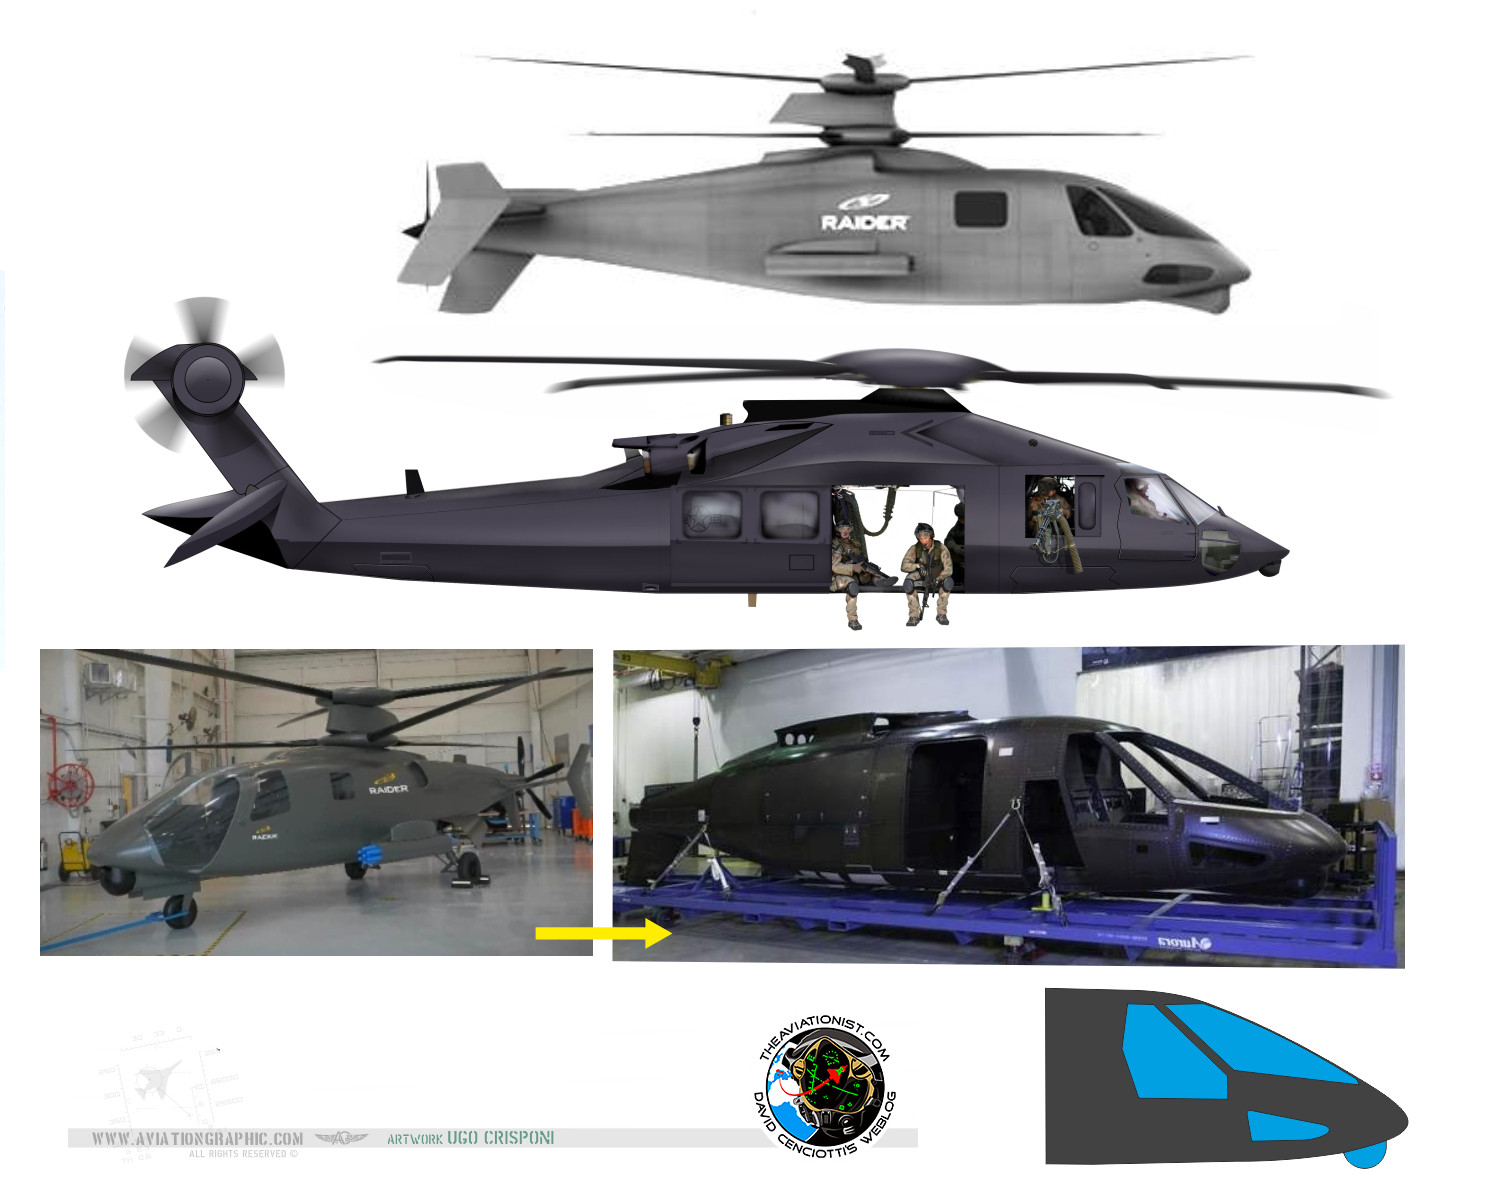 MIRAGEC14: New Sikorsky S-97 Raider similar to the mysterious Stealth “Osama Bin ...